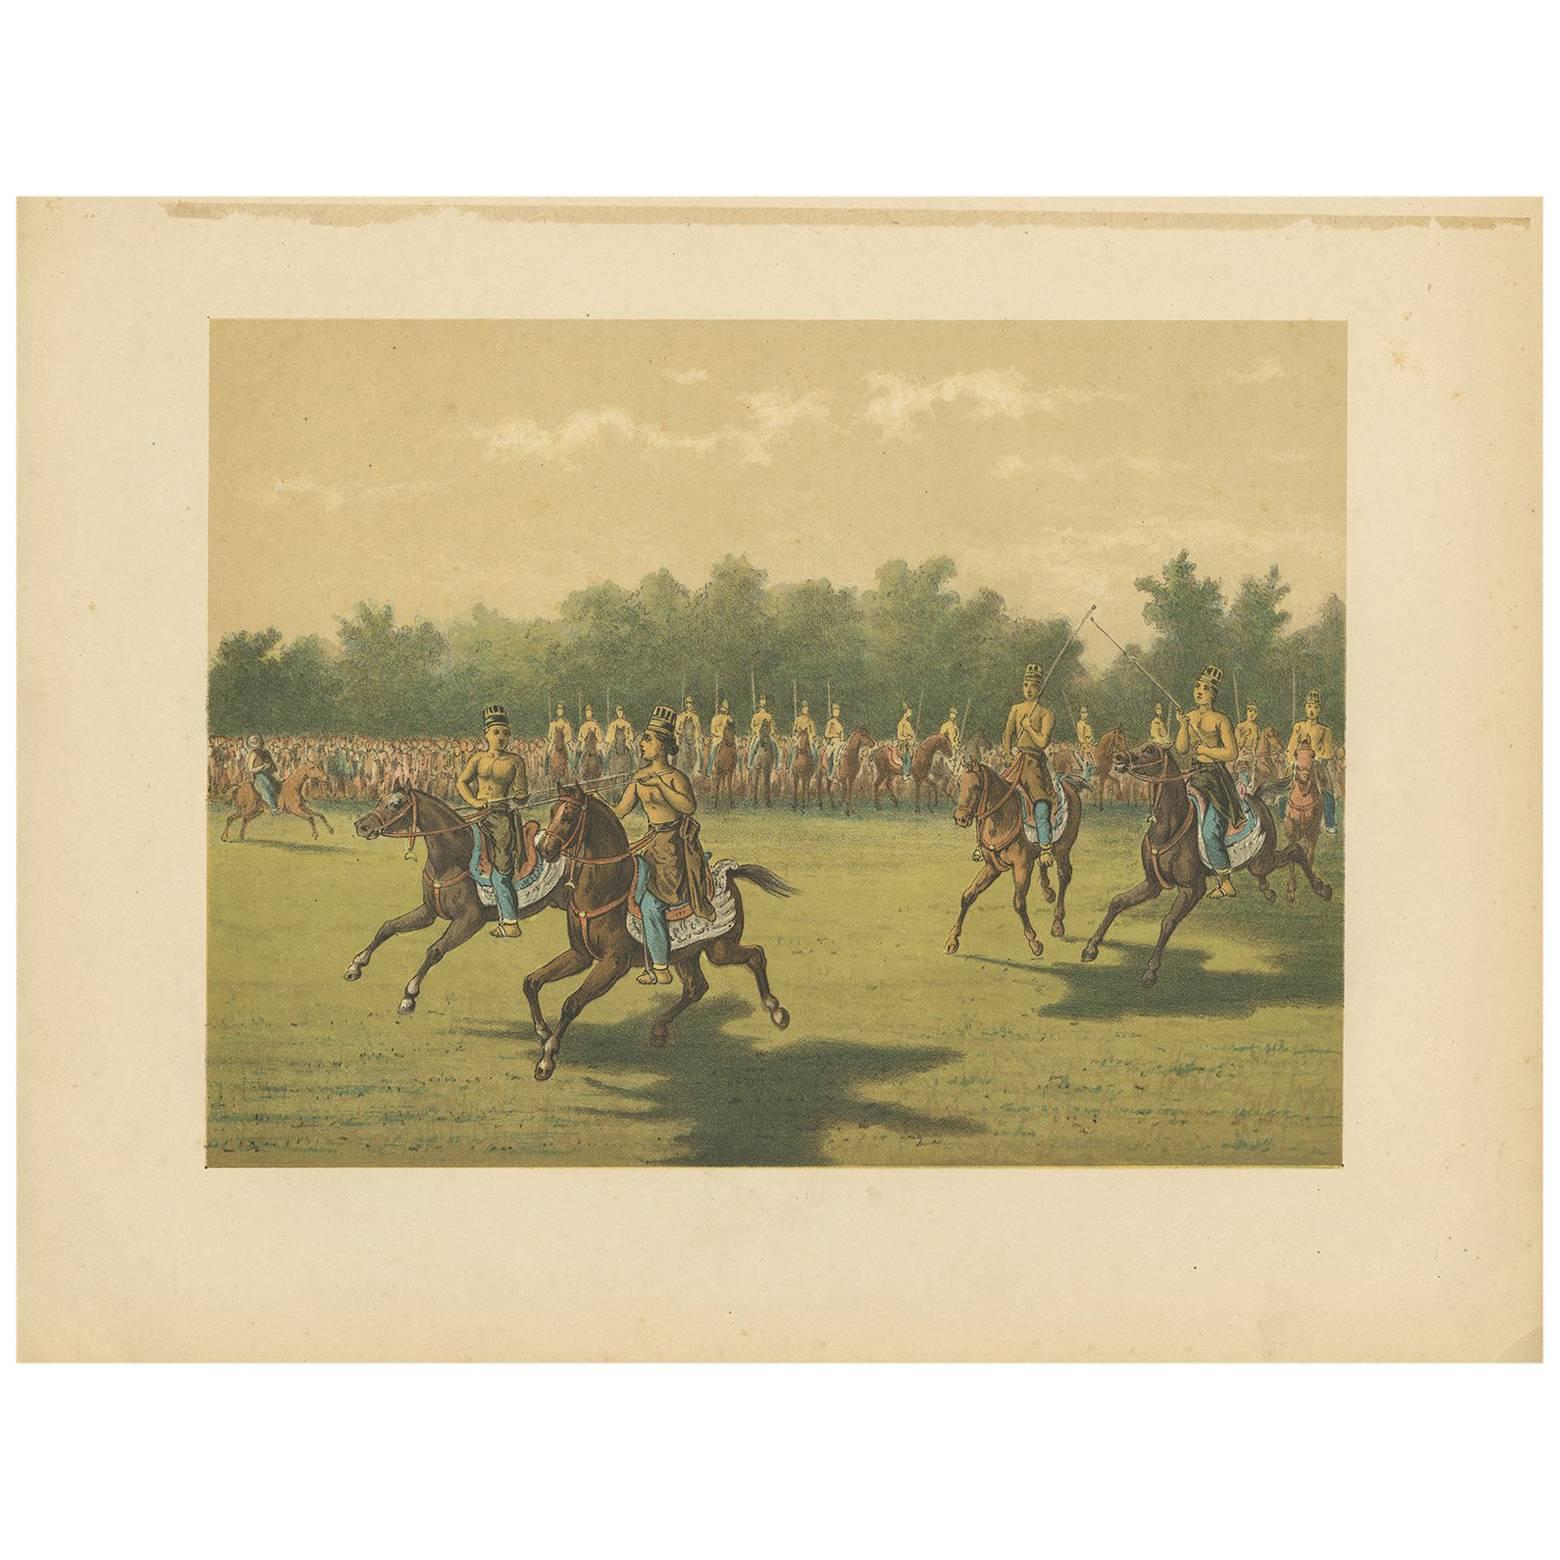 Antique Print of a Ceremony for the Raden Ajoe by M.T.H. Perelaer, 1888